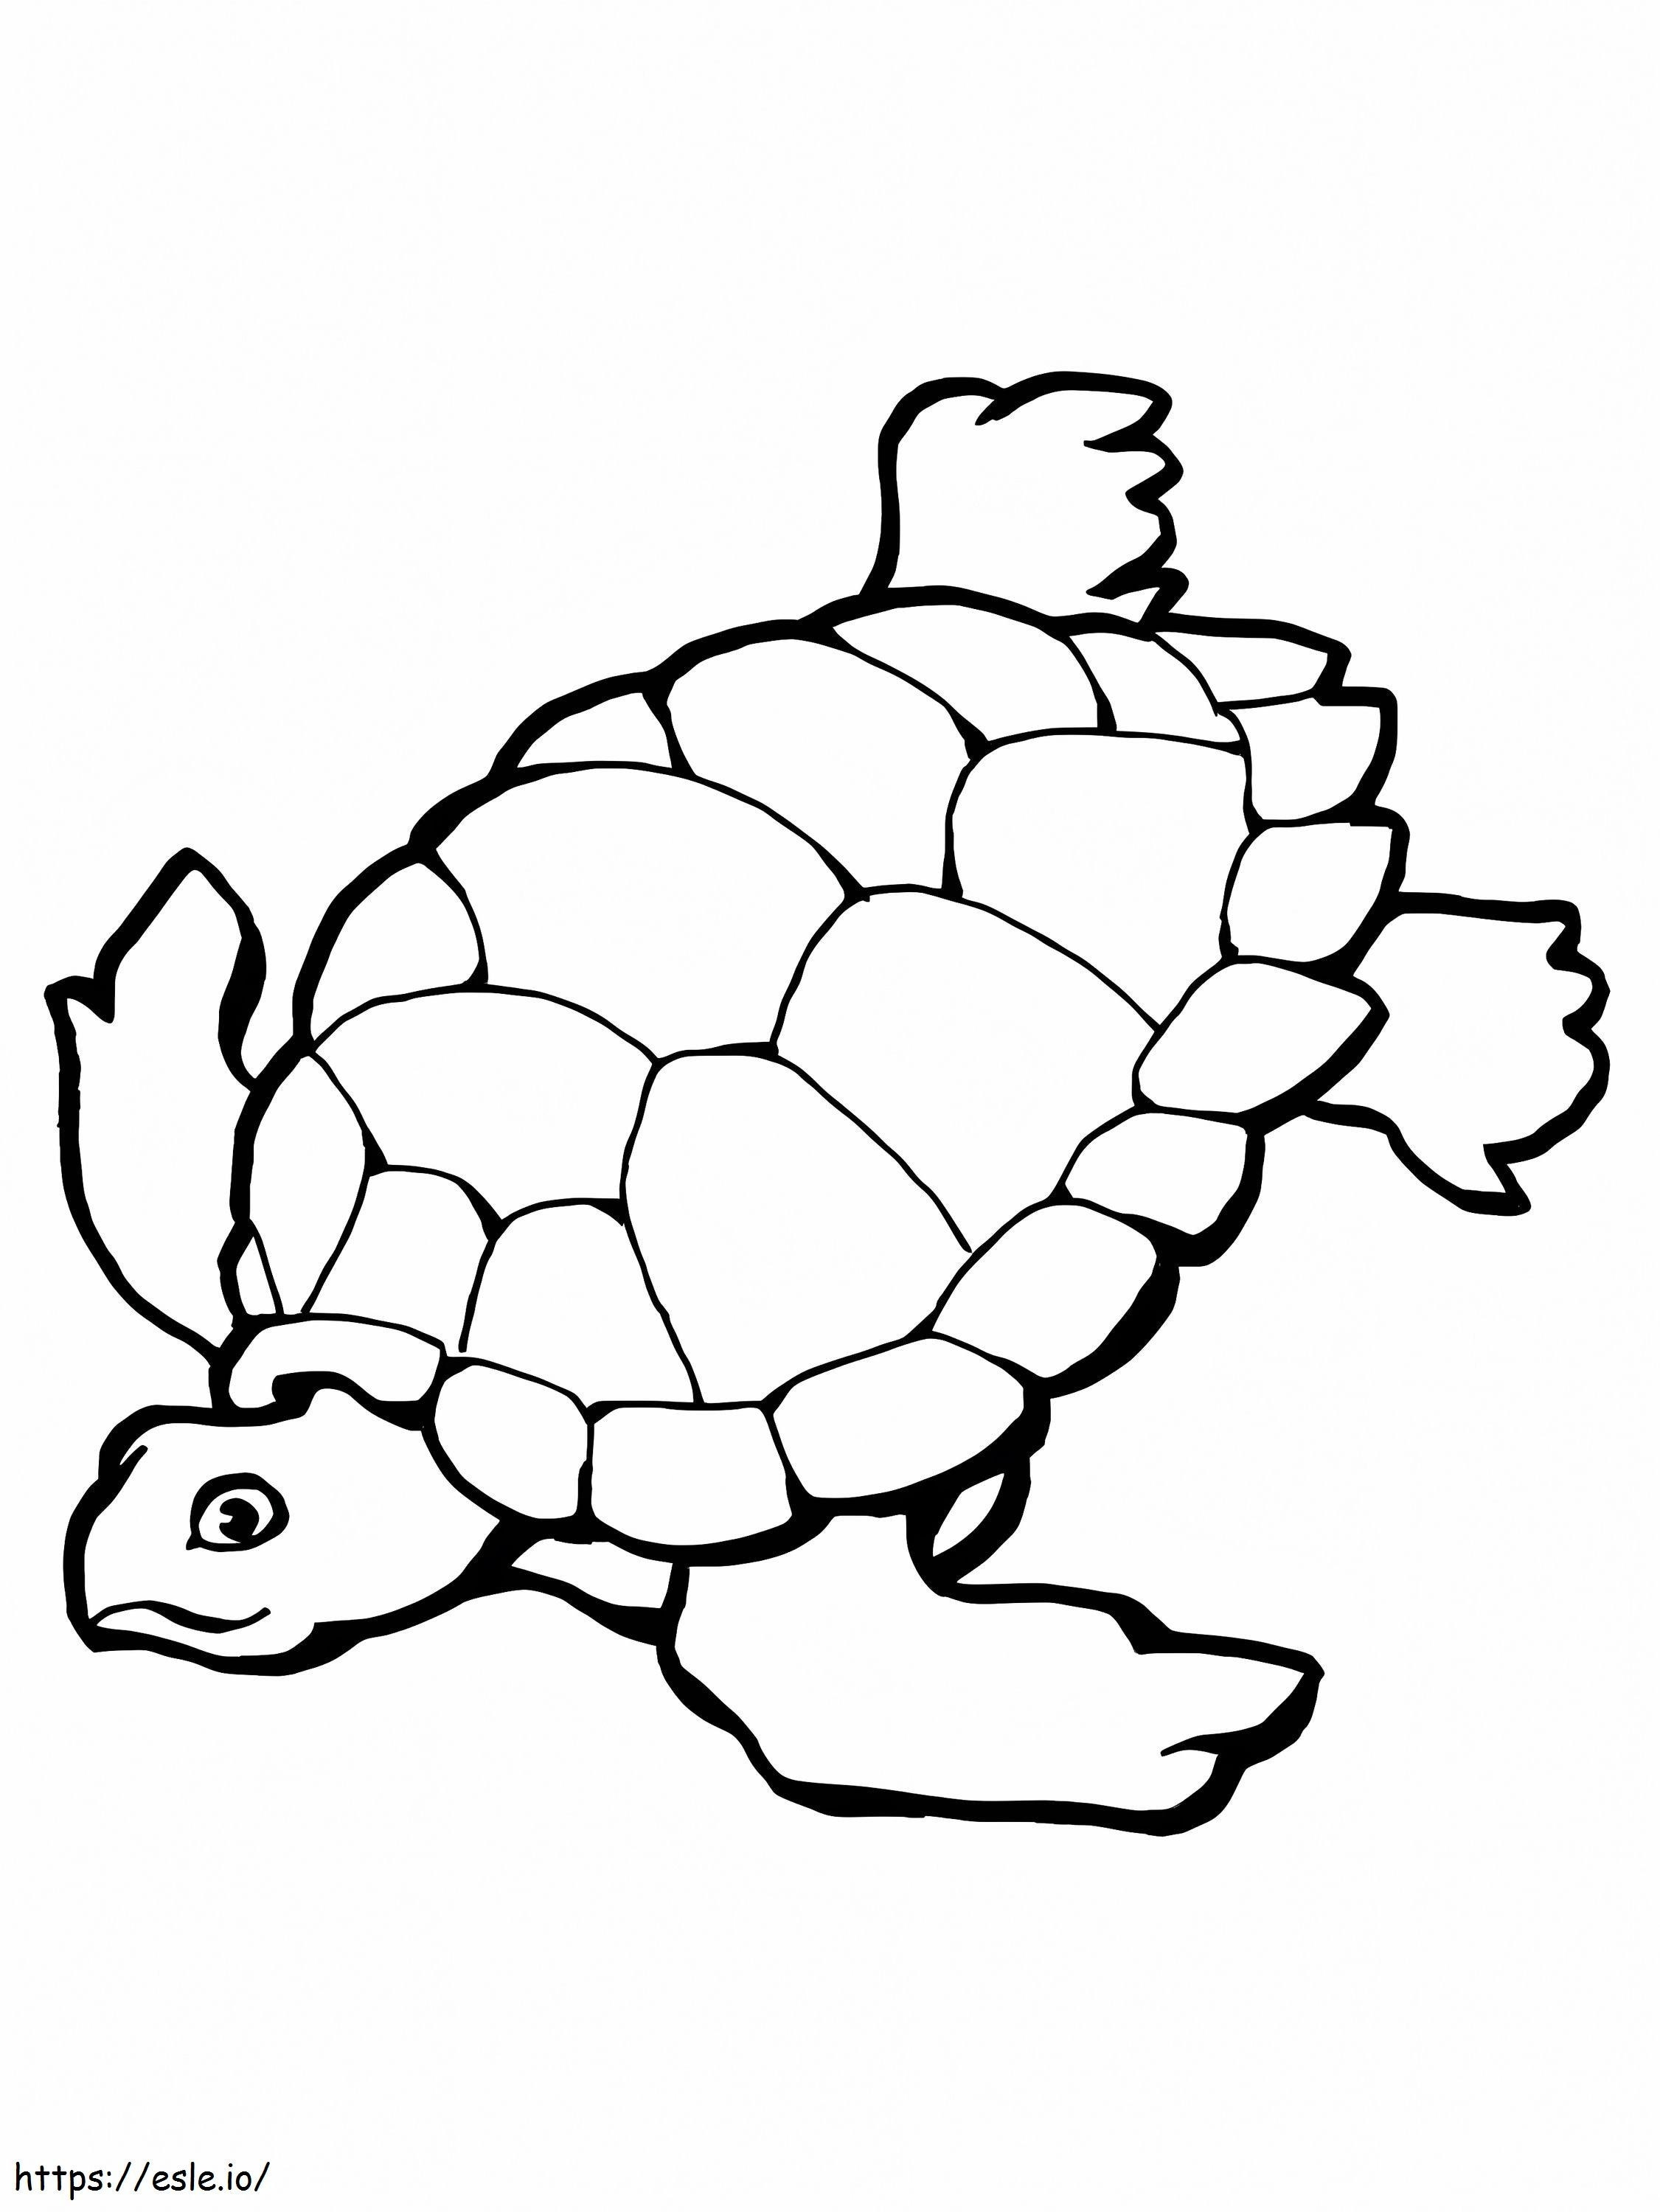 Sea Turtle Swimming coloring page